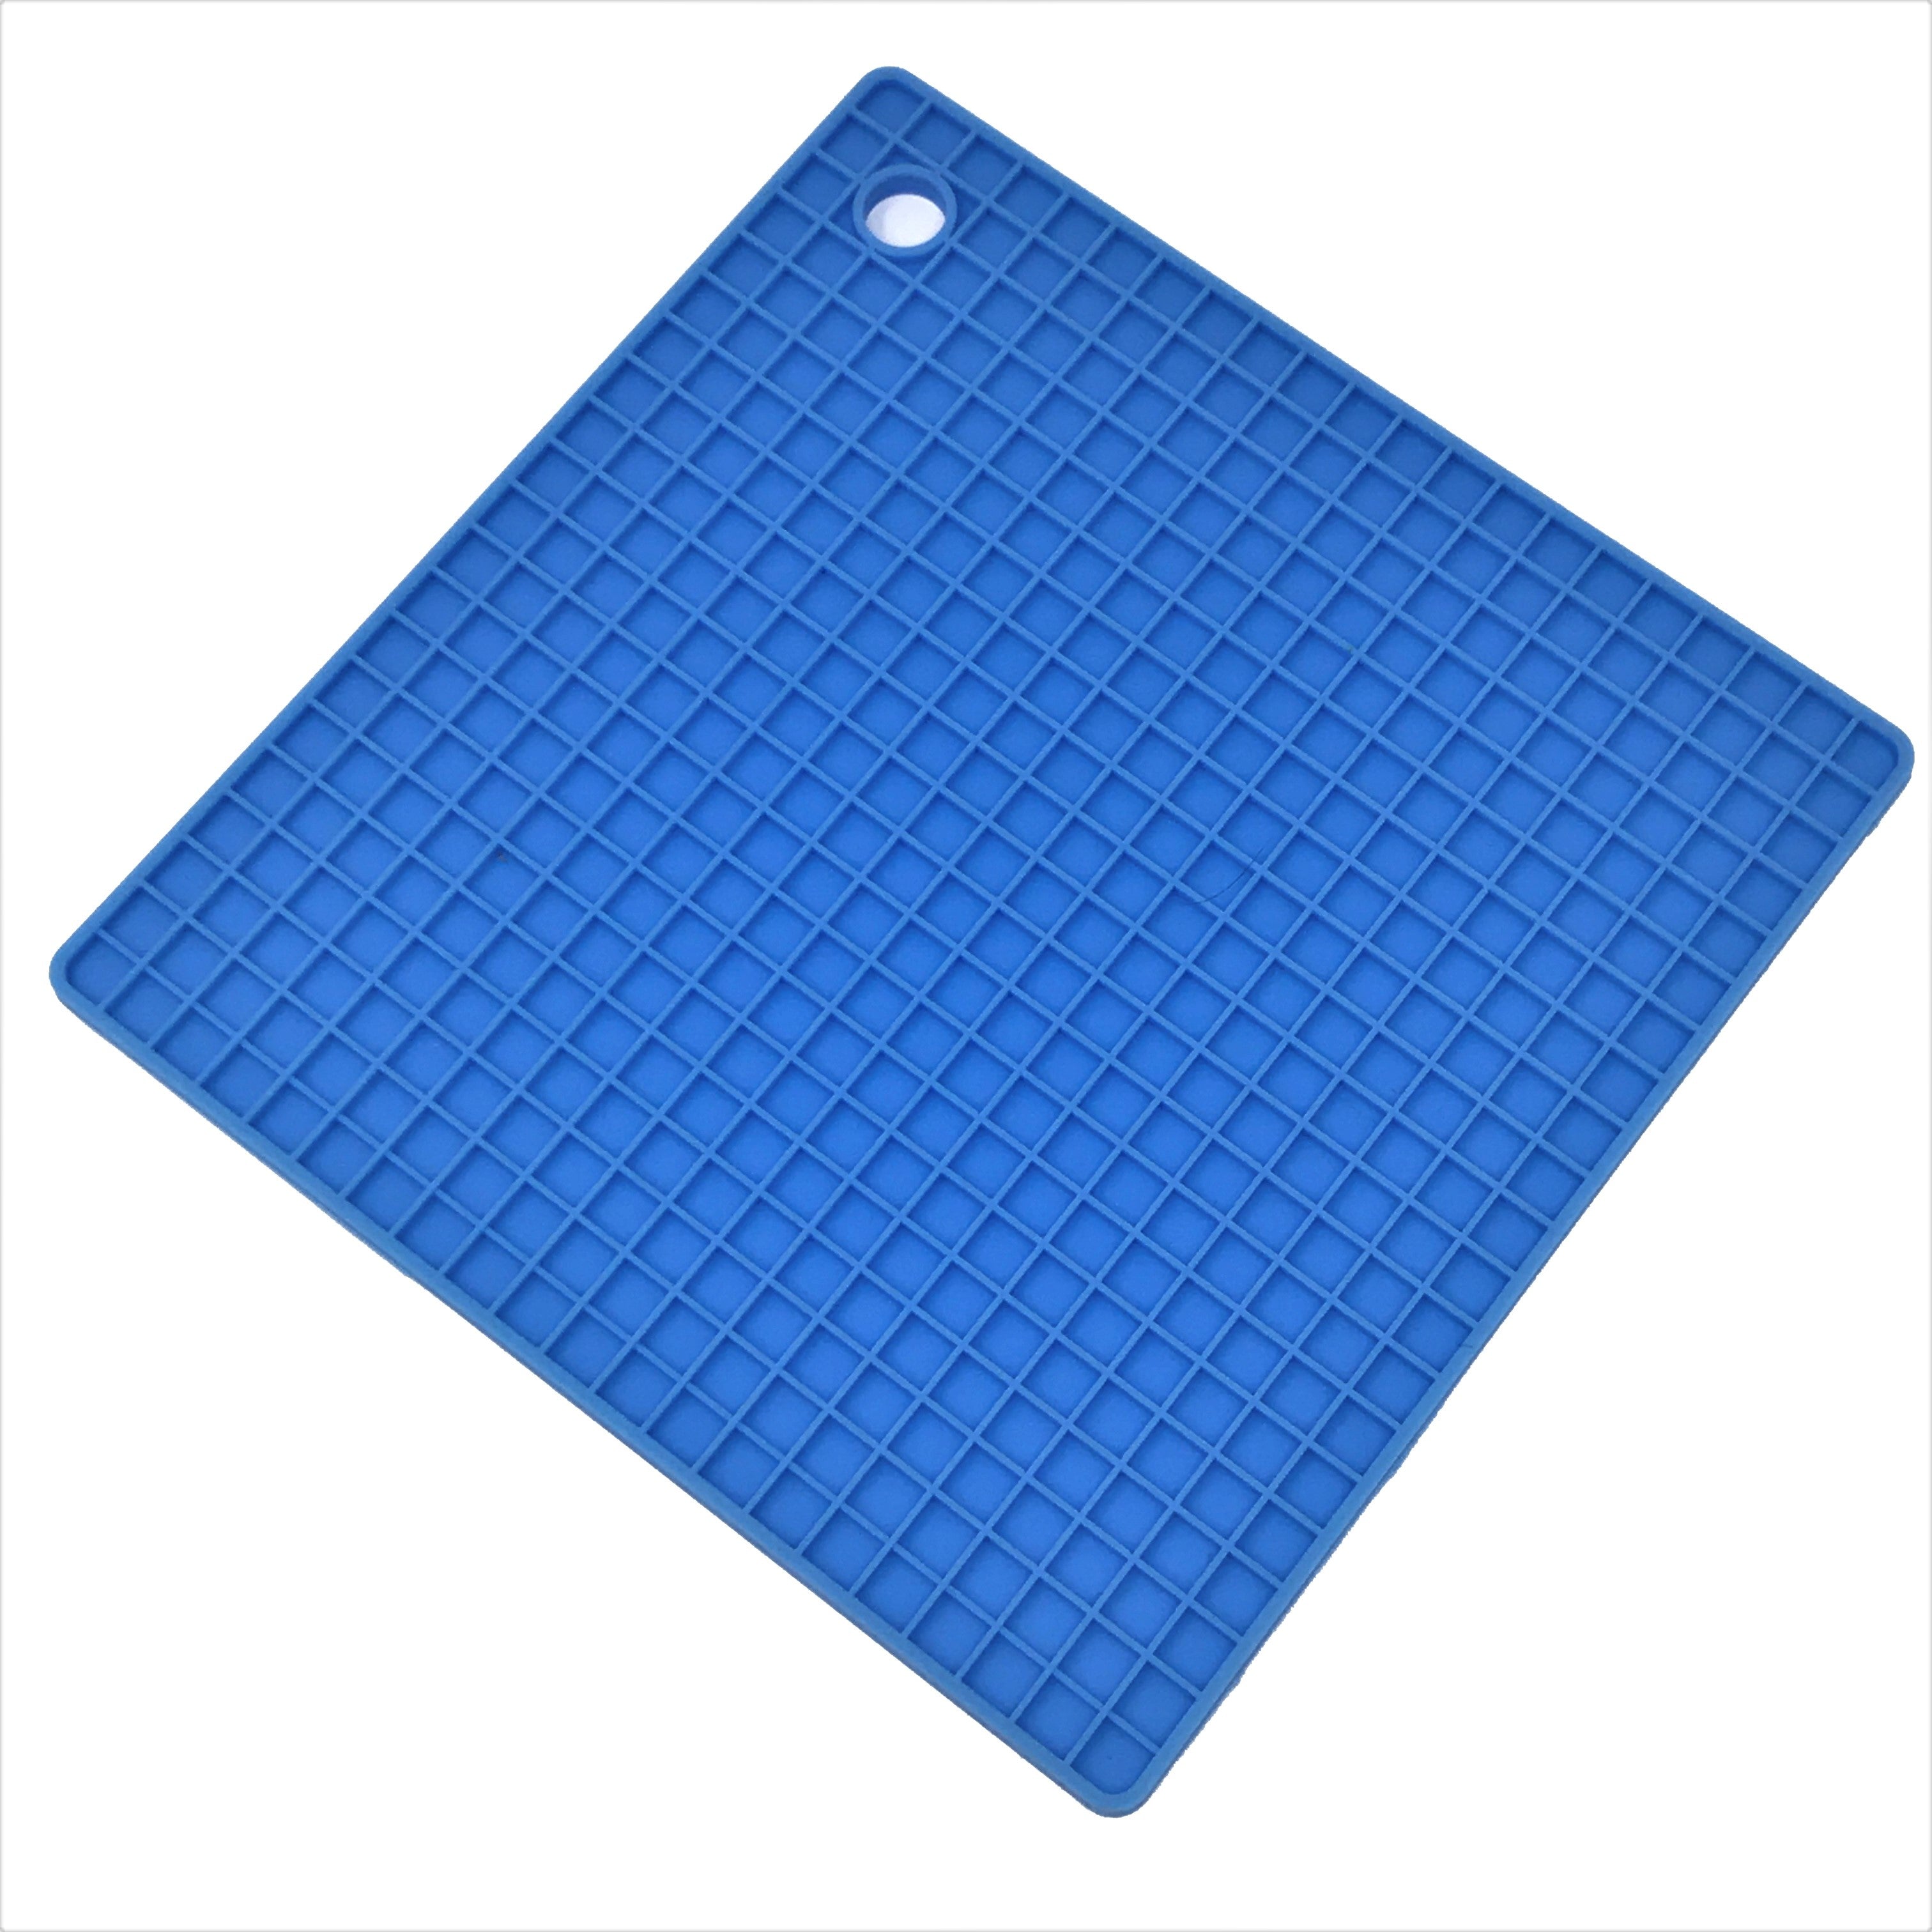 Silicone Rubber Mat for Hot Pan and Pot Hot Pads Counter Non-Slip